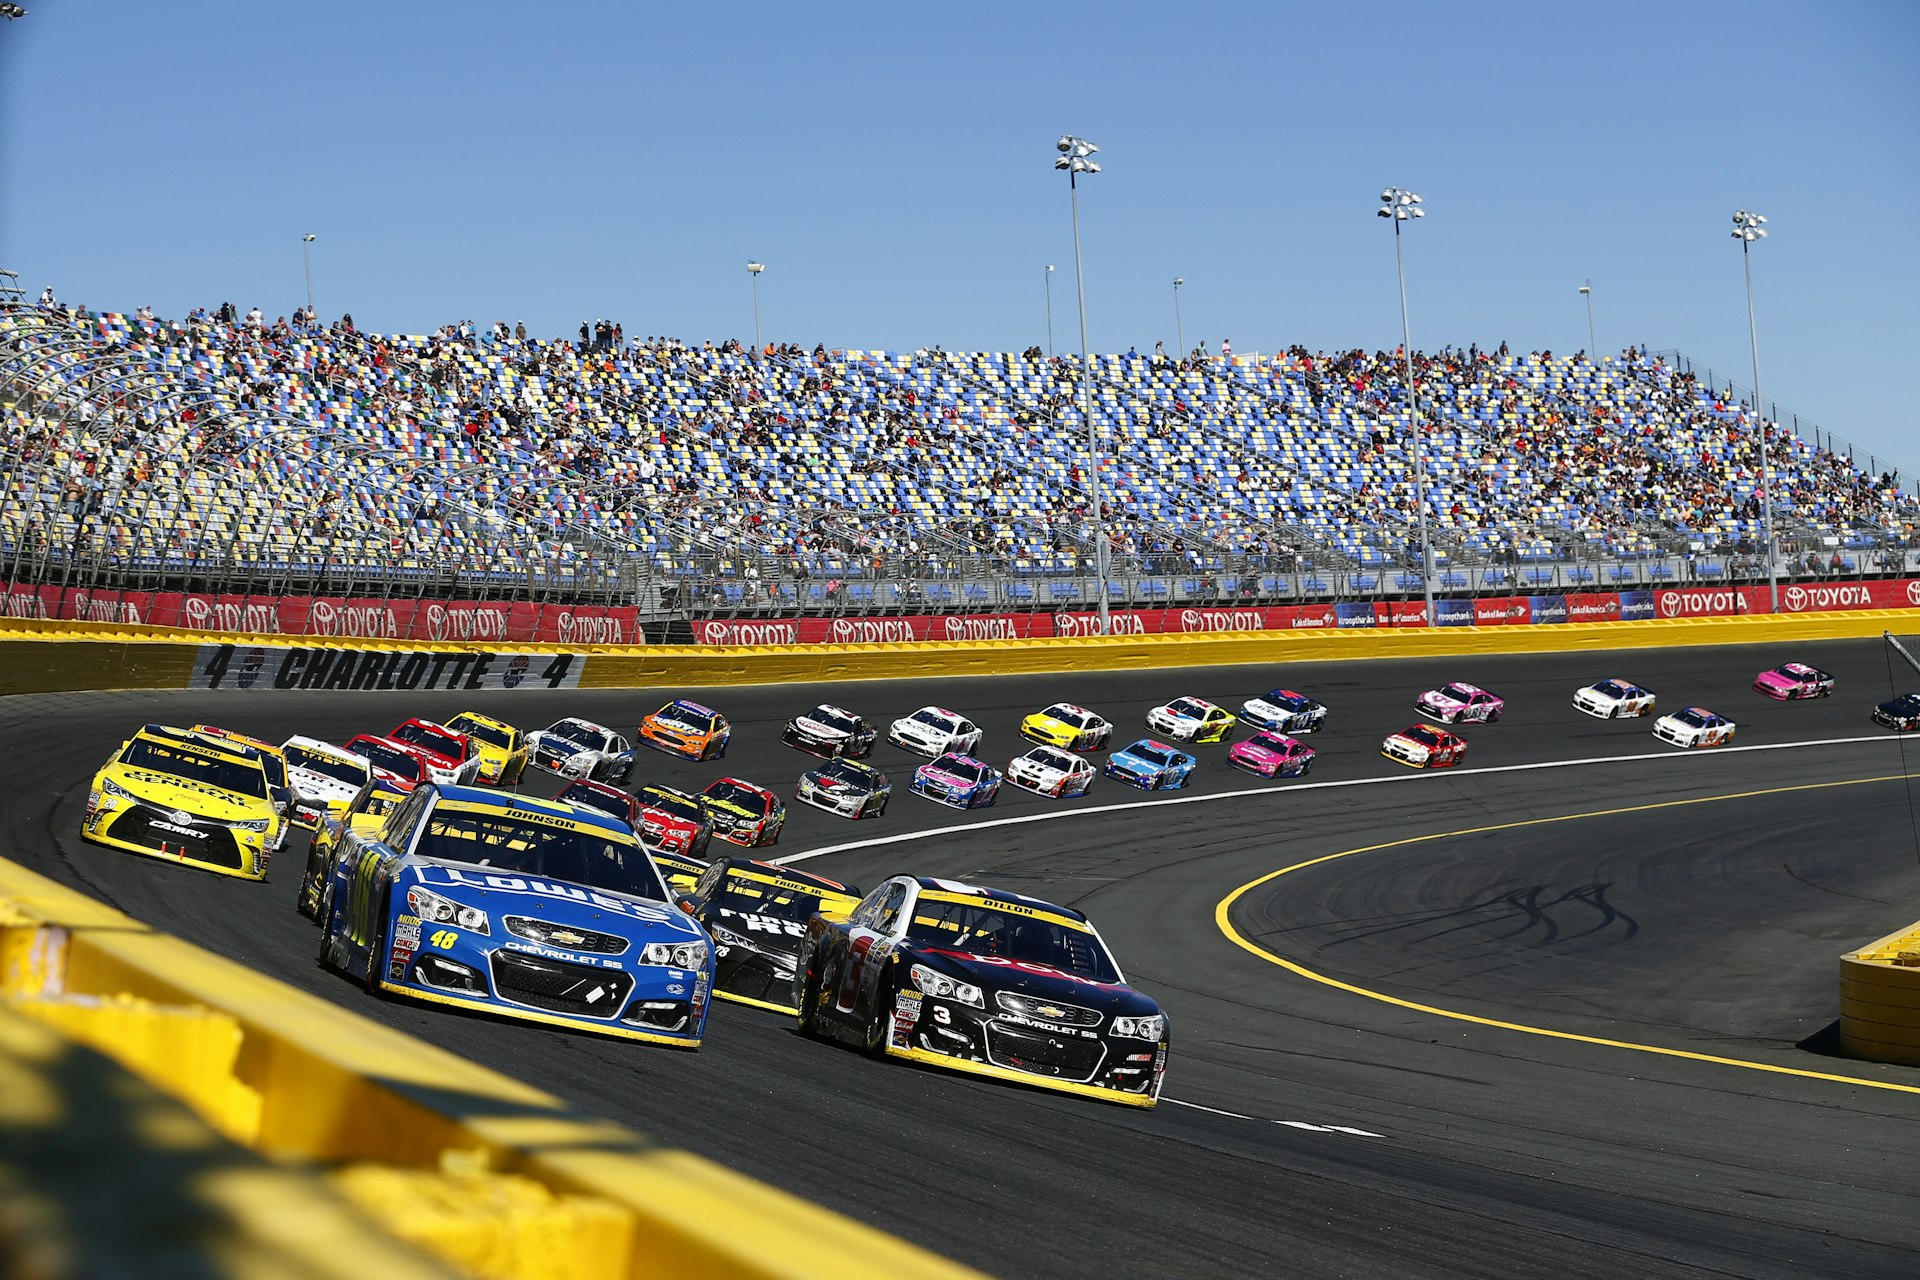 Jimmie Johnson (48) and Austin Dillon (3) lead the field to a restart during the Bank of America 500 at the Charlotte Motor Speedway in Concord.